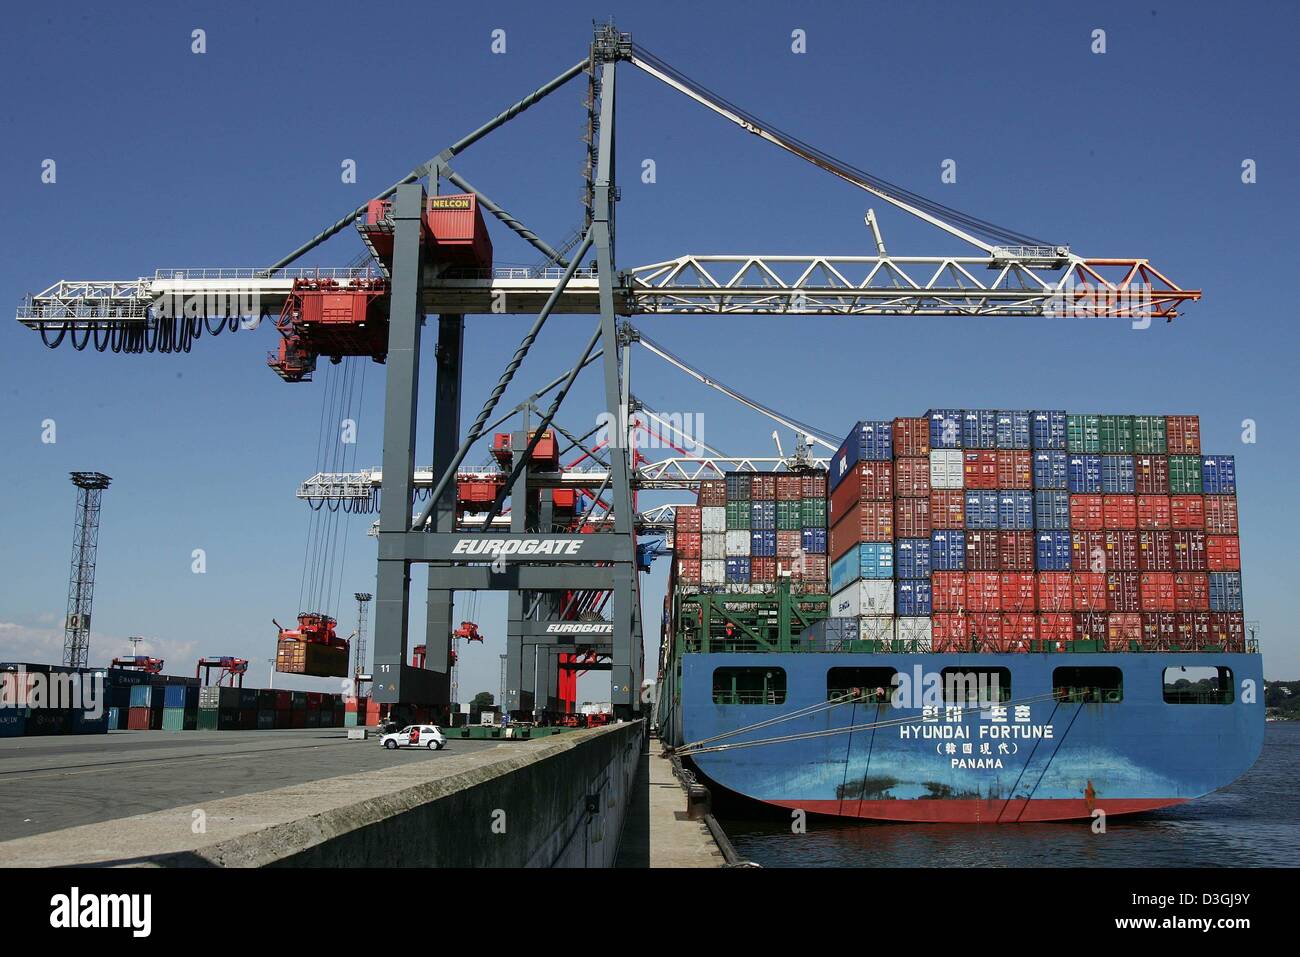 A row of cranes moves large containers around at the container harbour in Hamburg, Germany, 29 July 2004. The container harbour continues to be the European harbour with the strongest growth in shipping business for the fifth year in row.   Keywords: Economy-Business-Finance, EBF, Transport, Company Information, containers, harbour, shipping, container vessel, containership, GERMAN Stock Photo